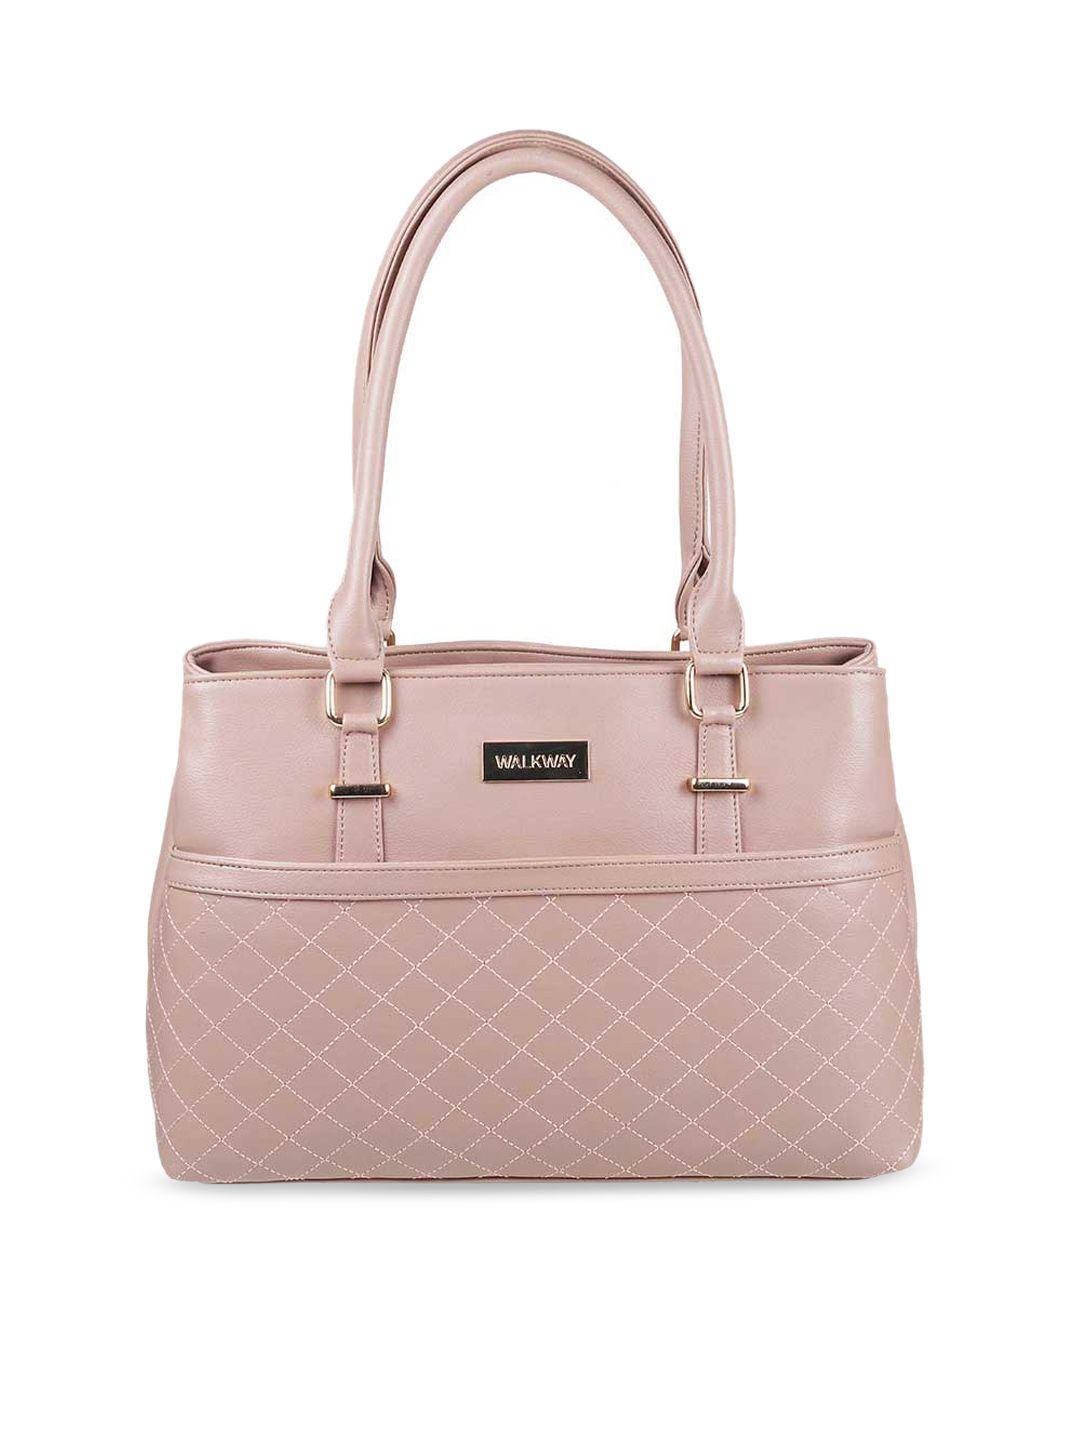 walkway by metro peach-coloured structured shoulder bag with quilted